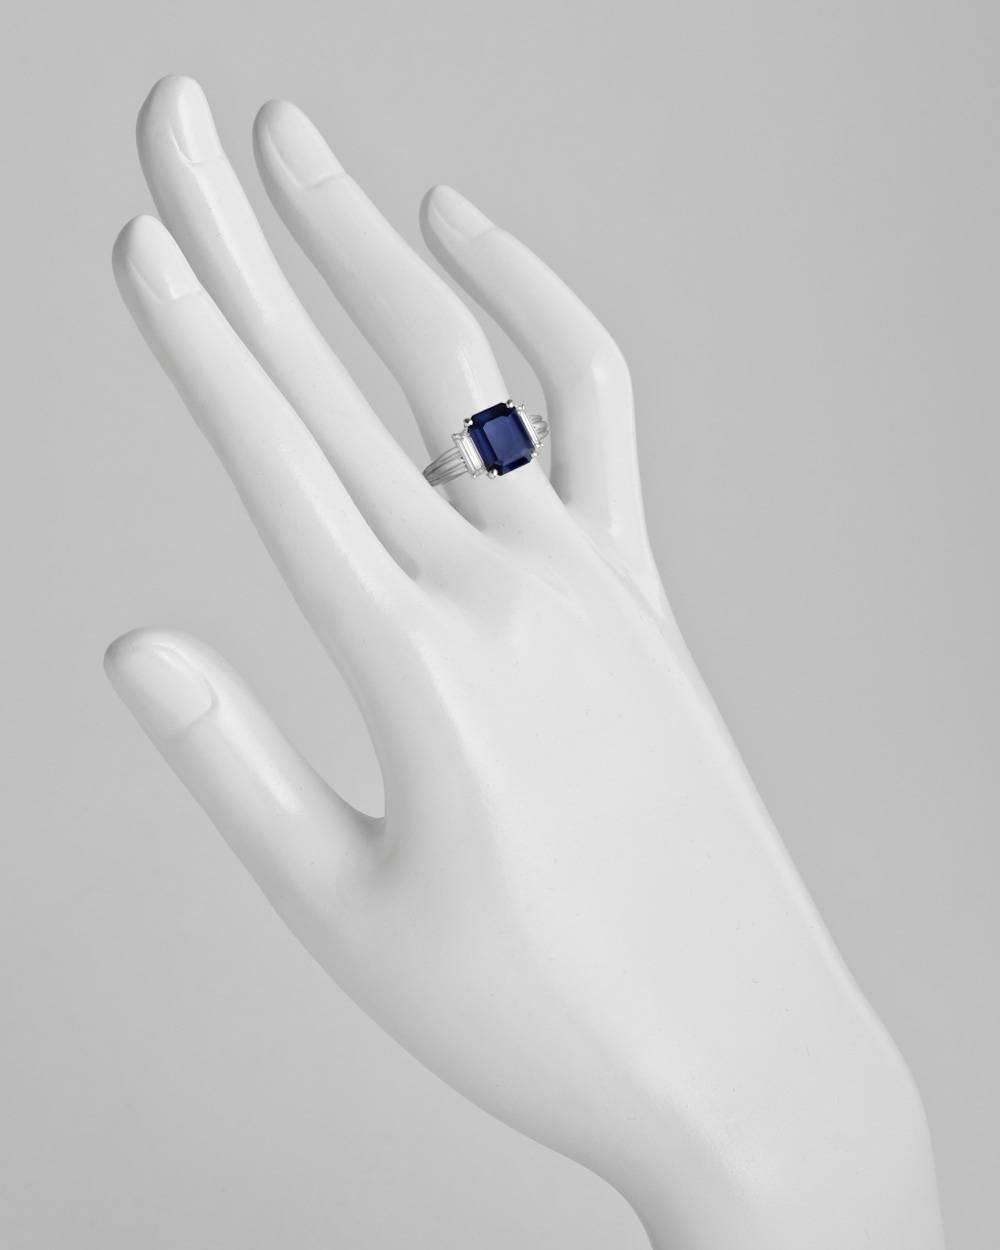 Dress ring, centering an emerald-cut sapphire weighing approximately 2.76 carats, flanked by near-colorless baguette-cut diamond shoulders weighing approximately 0.59 total carats, mounted in a fluted platinum setting. Size 5.25 (resizable to most